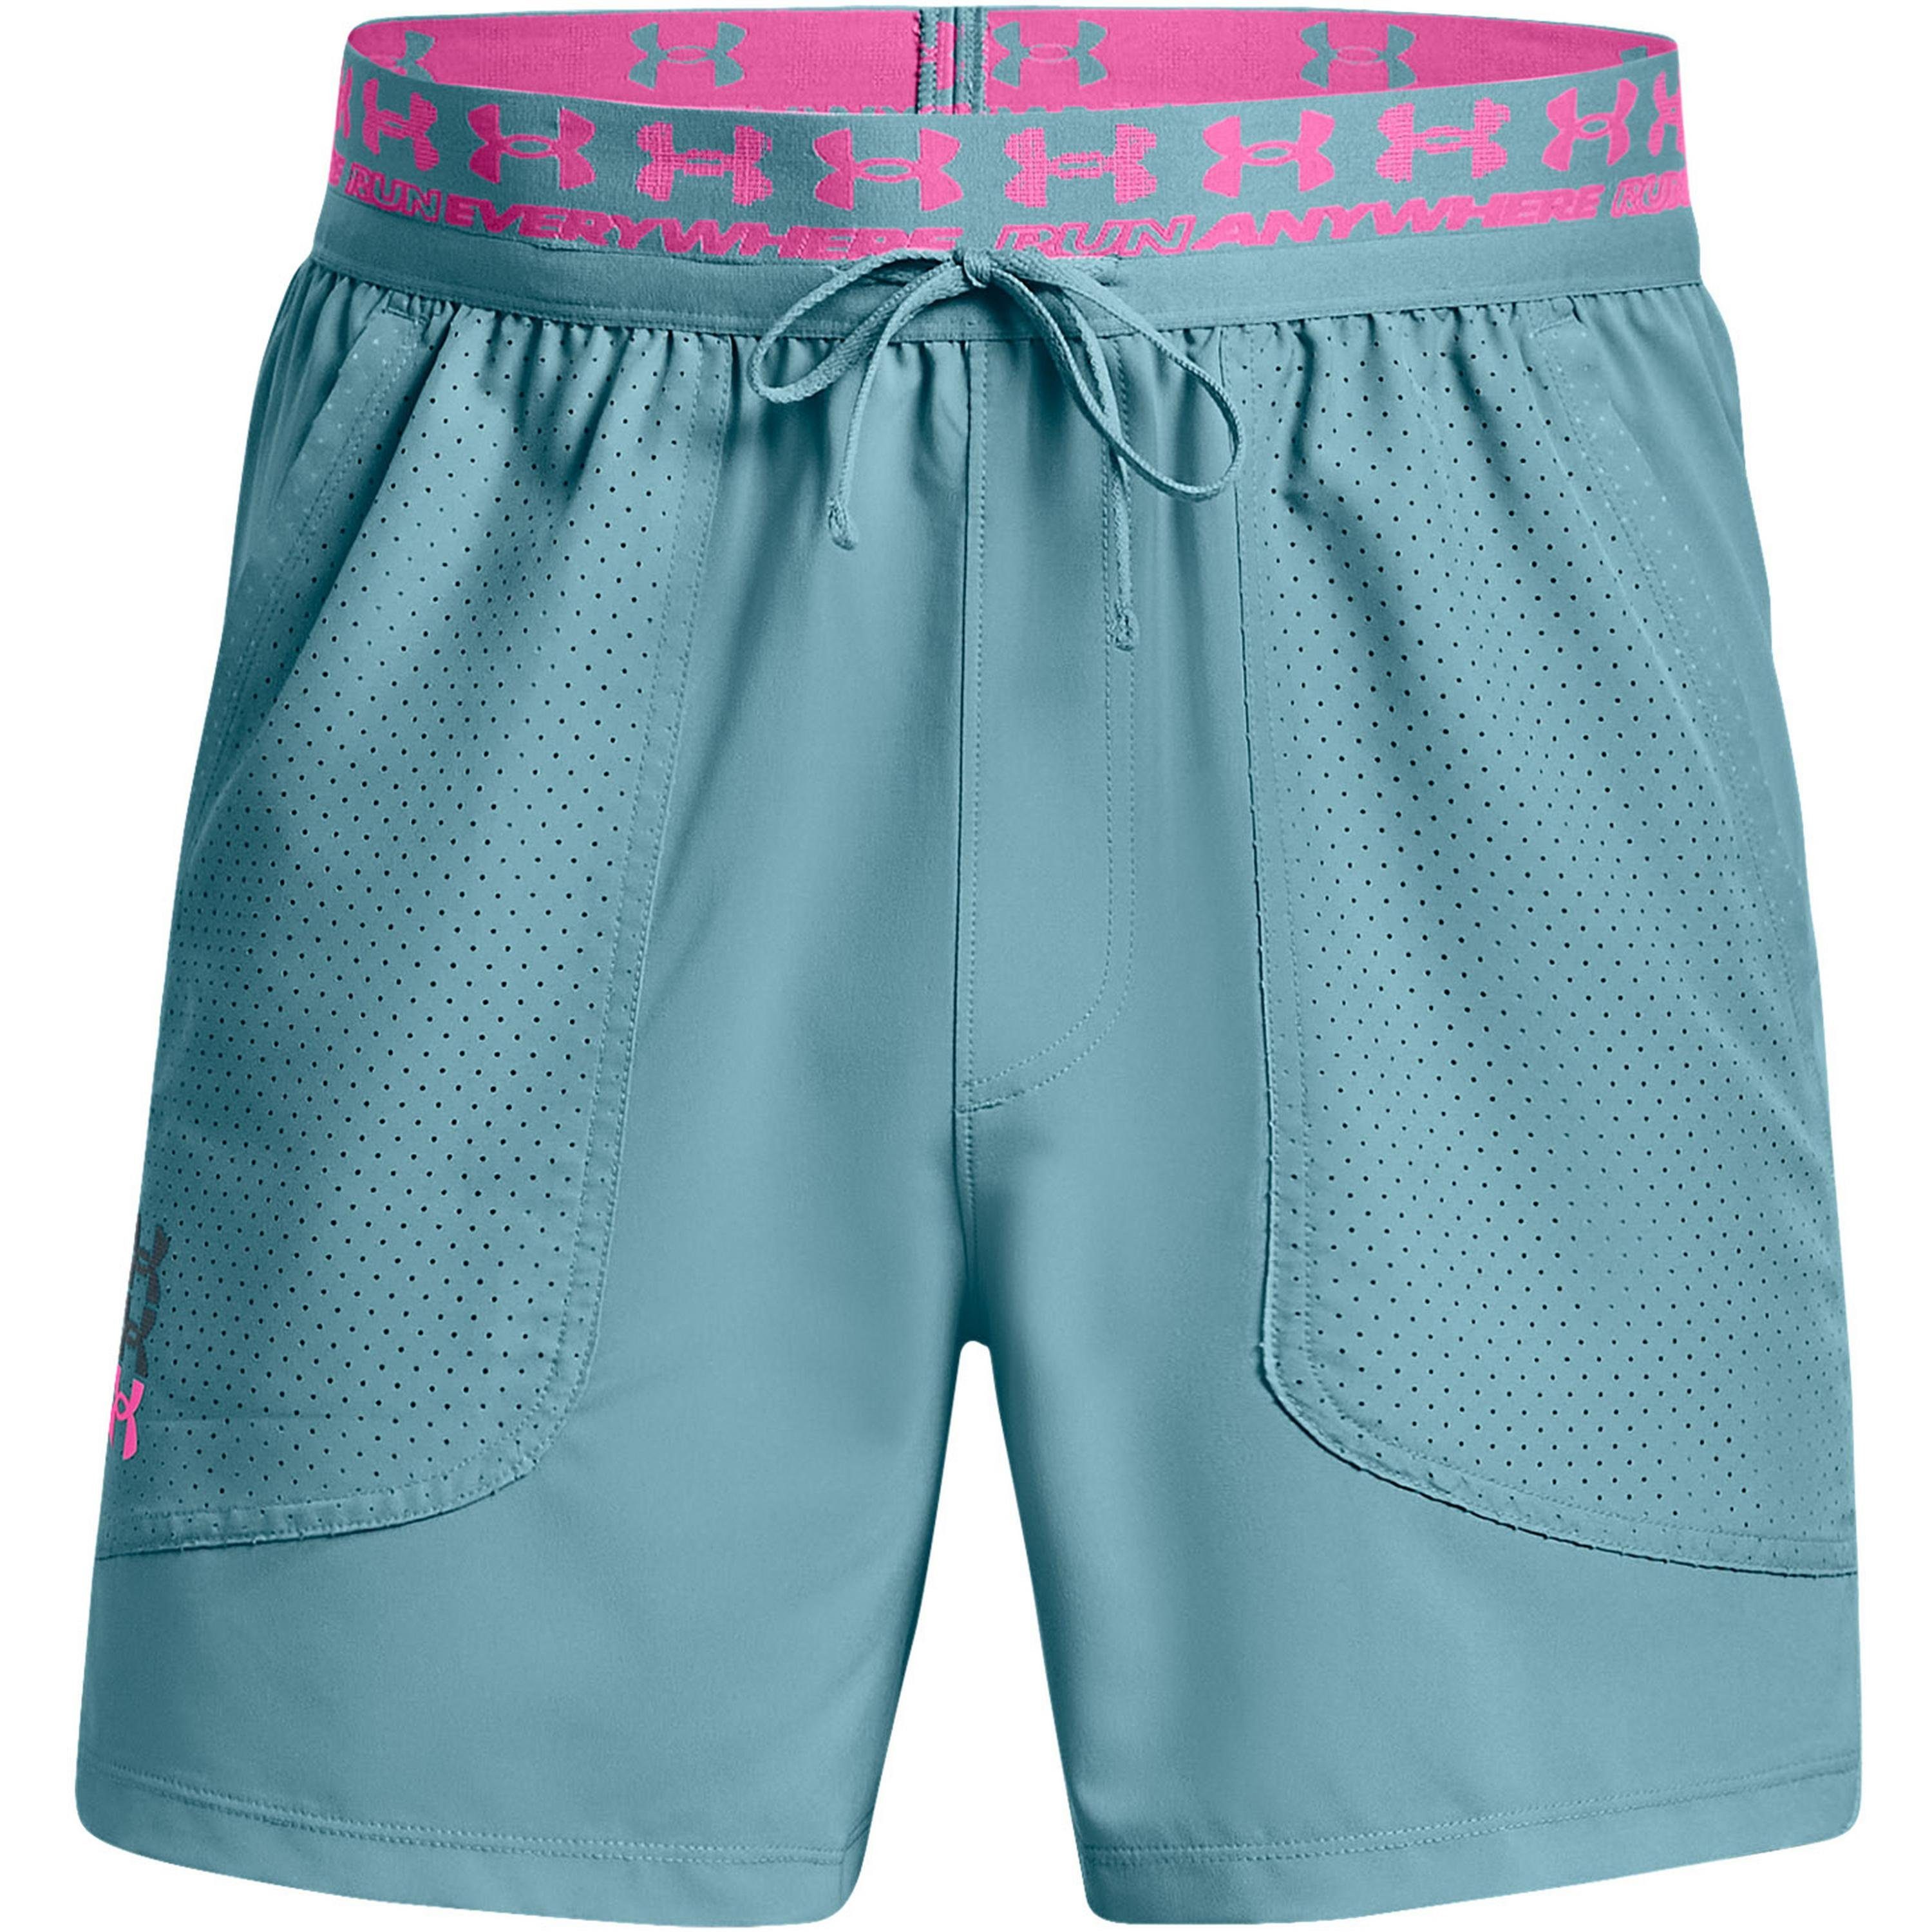 Under Armour® Funktionsshorts ANYWHERE stillwater-rebelpink-reflective